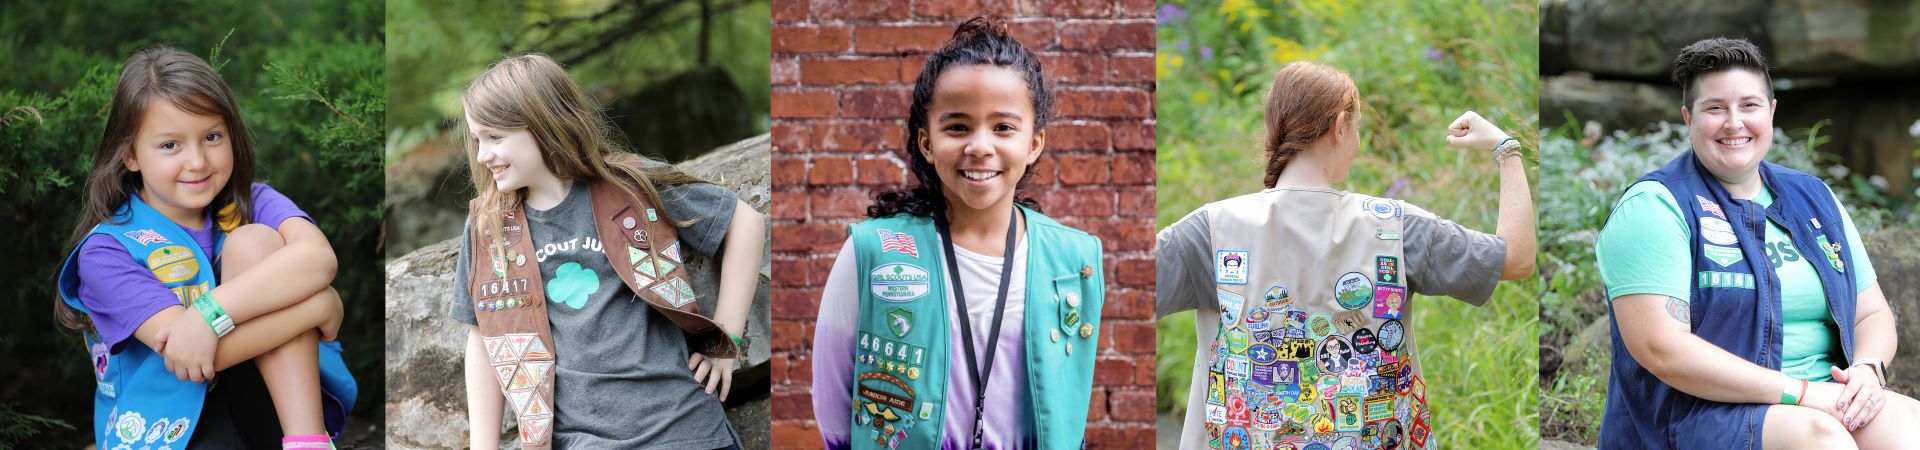  Girls of each grade level in vests filled with badges and patches 